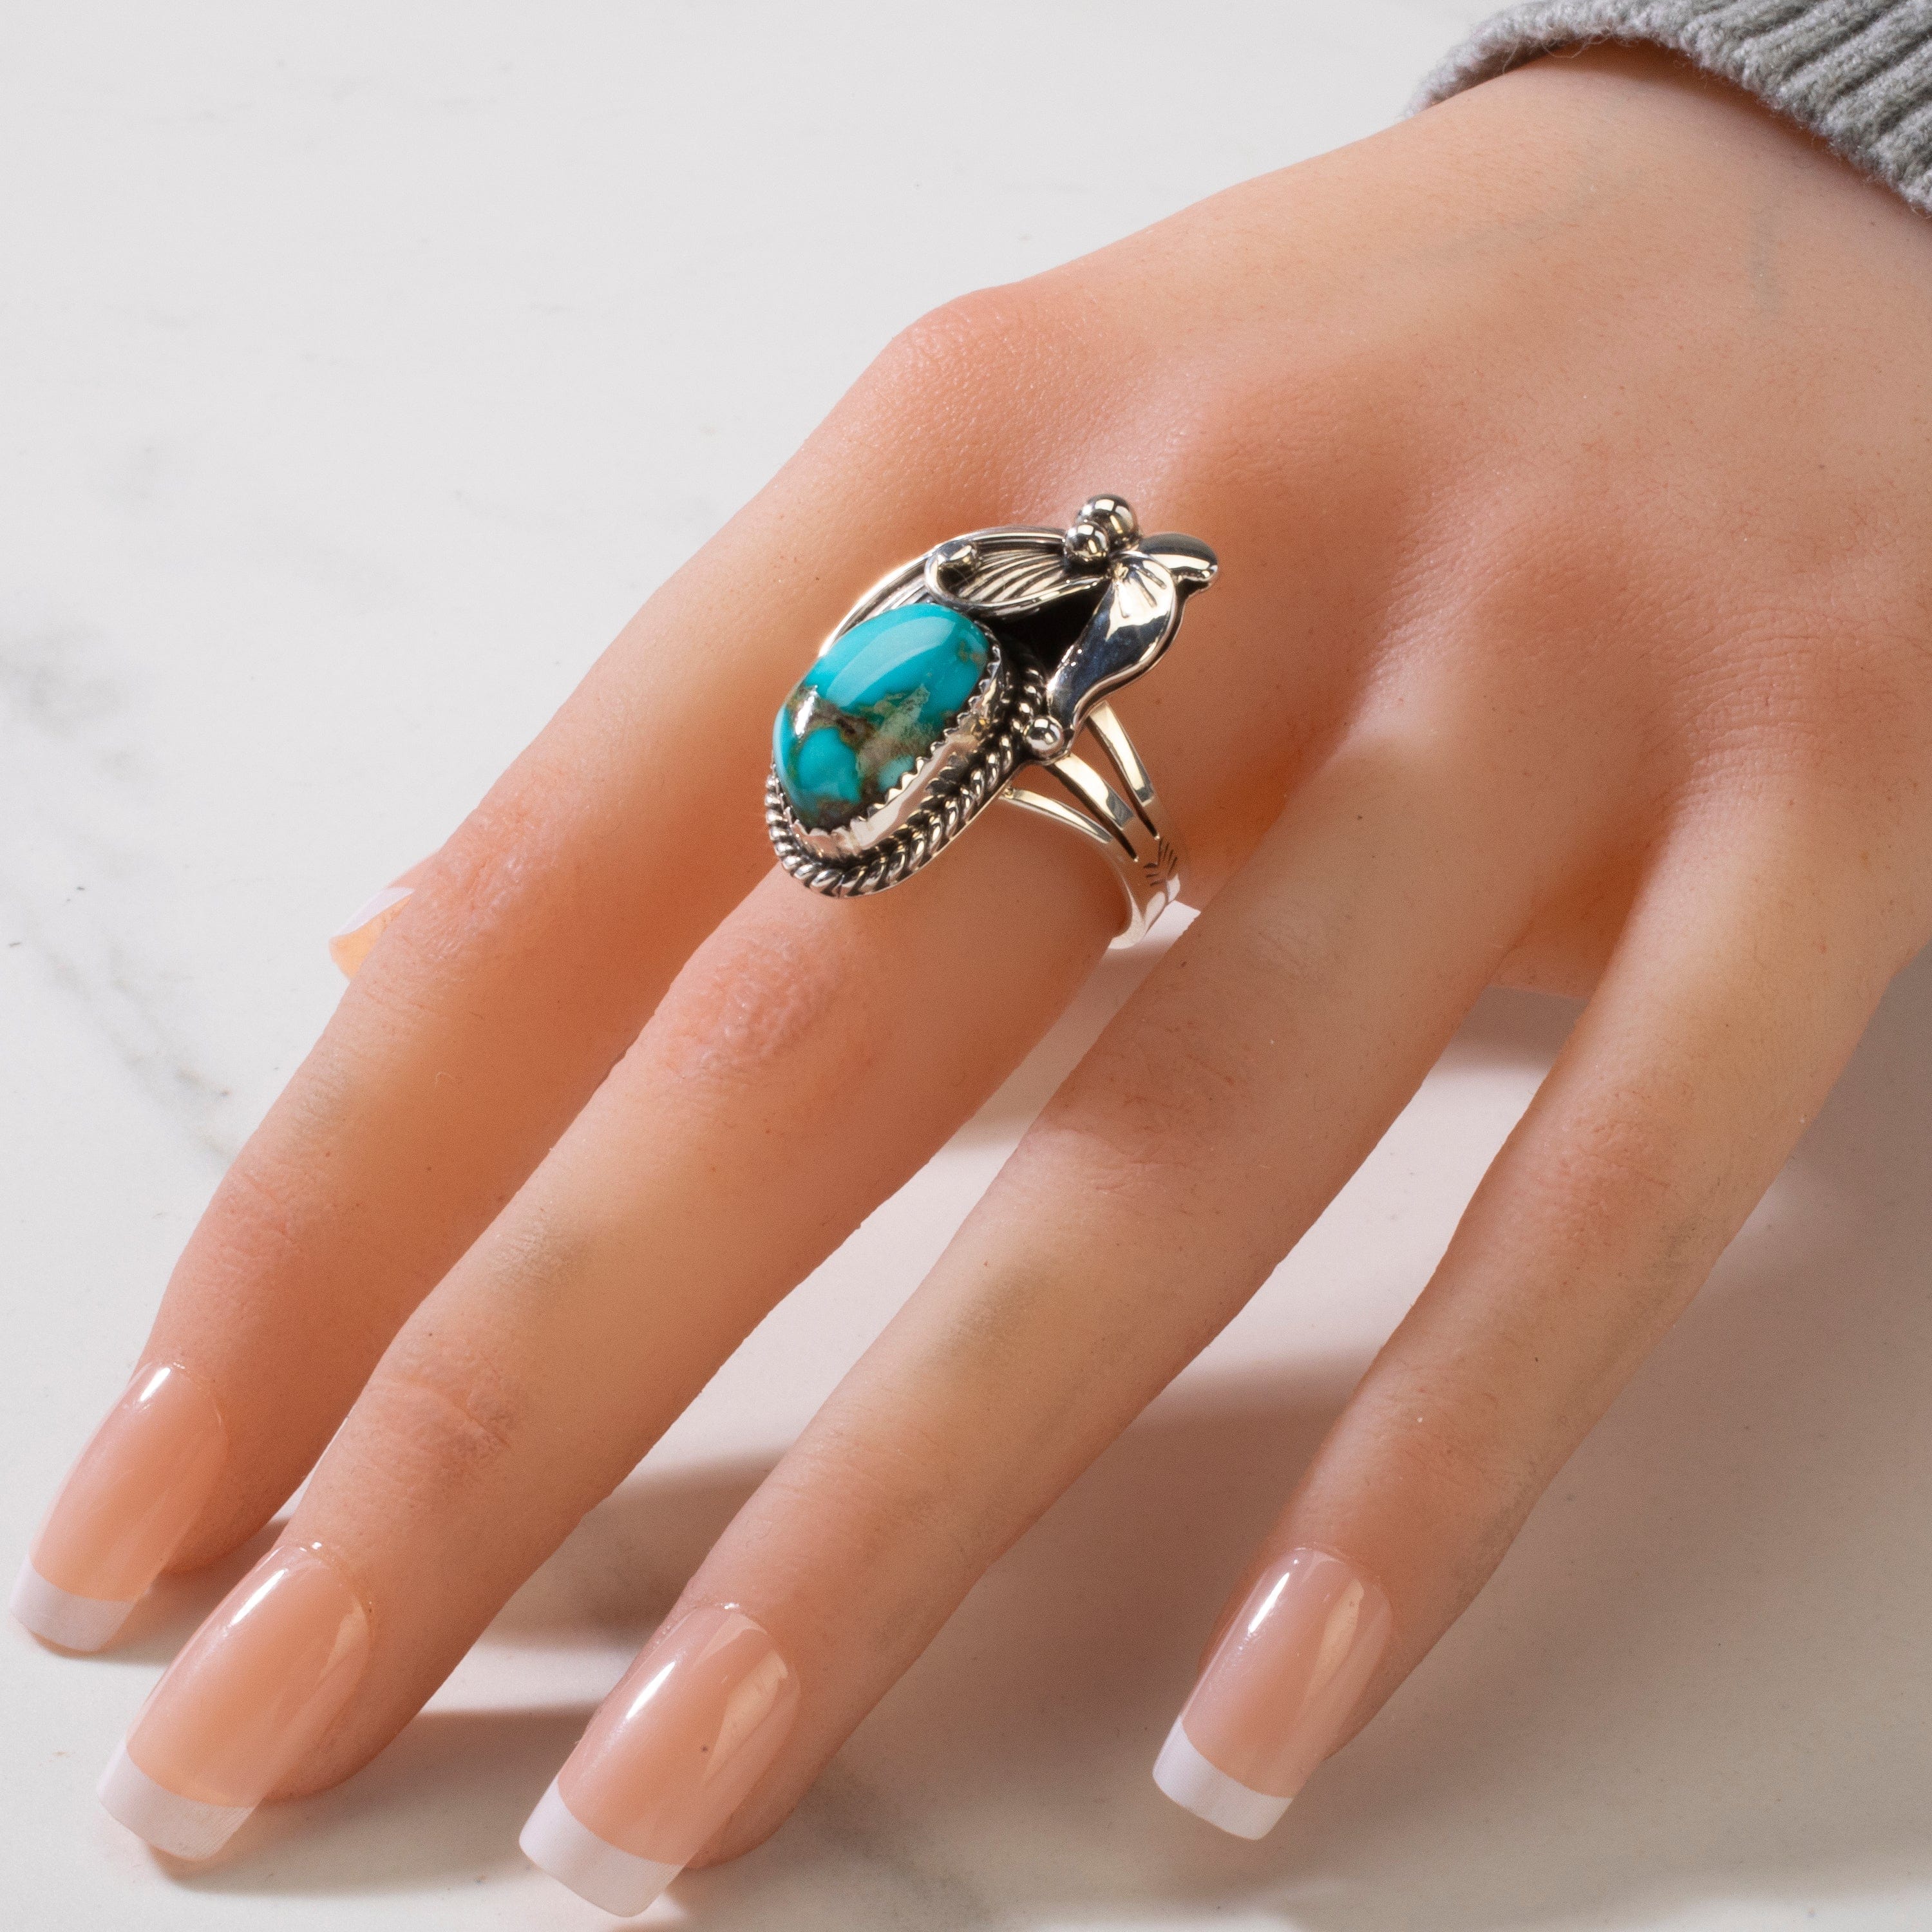 Kalifano Native American Jewelry 8 Joe Piaso Jr. Sleeping Beauty Turquoise Feather Navajo USA Native American Made 925 Sterling Silver Ring NAR600.084.8